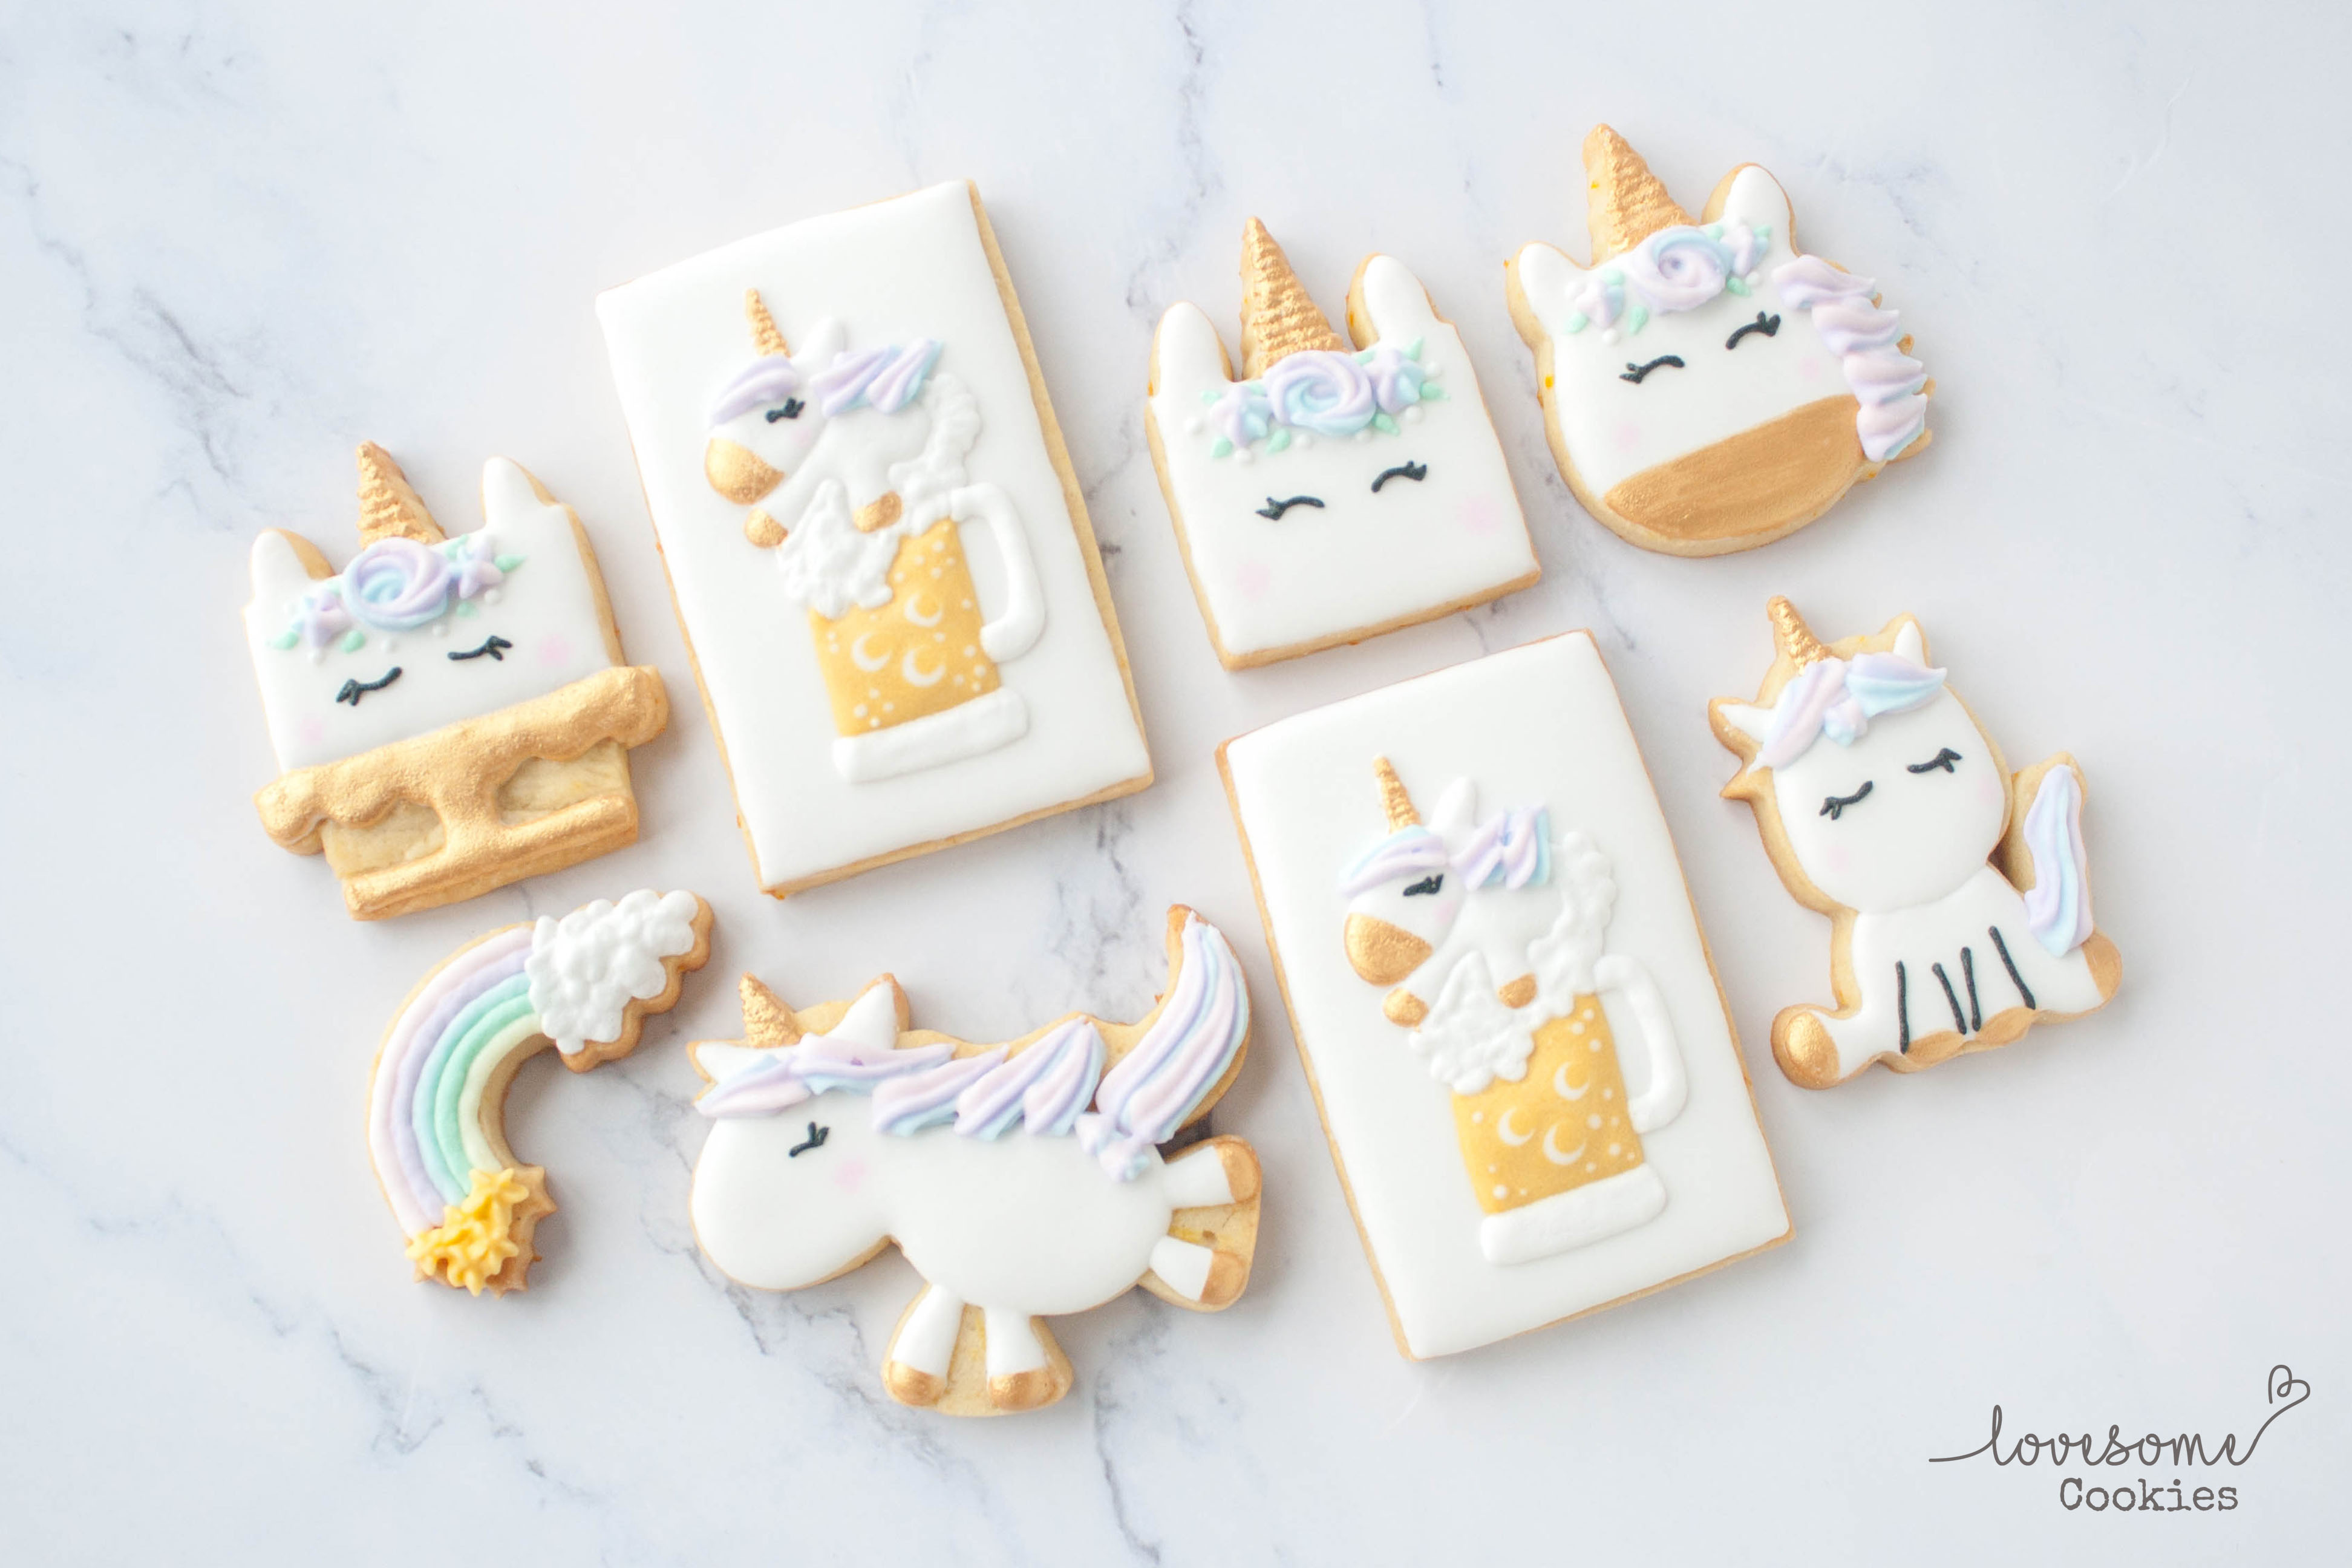 Lovesome Cookies unicorn Feature Cookier 